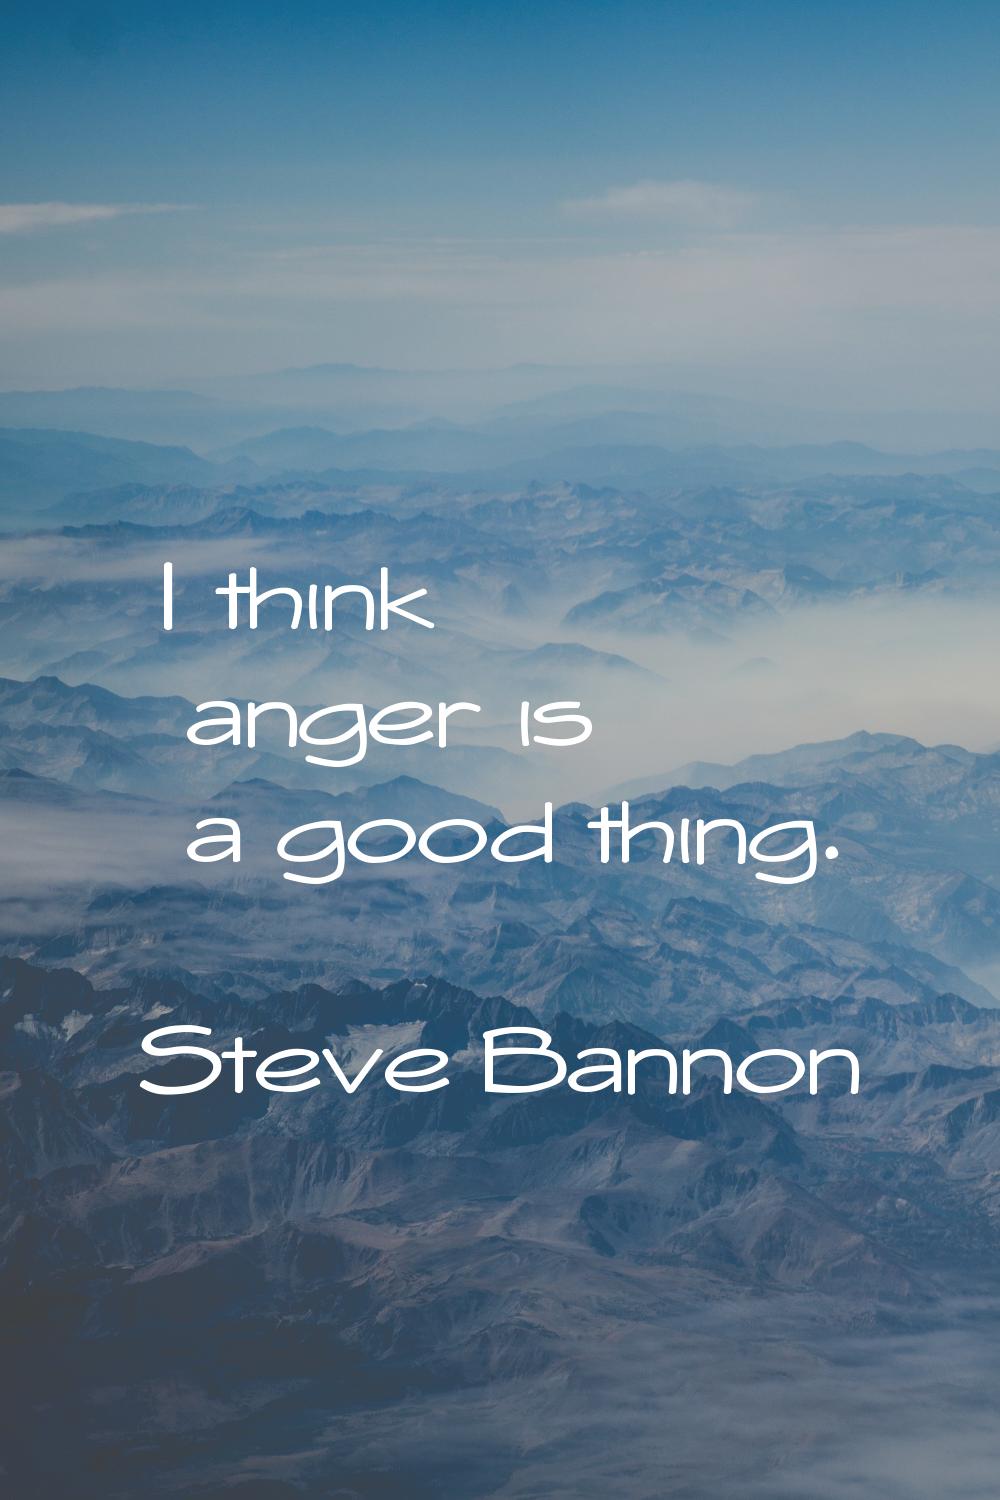 I think anger is a good thing.